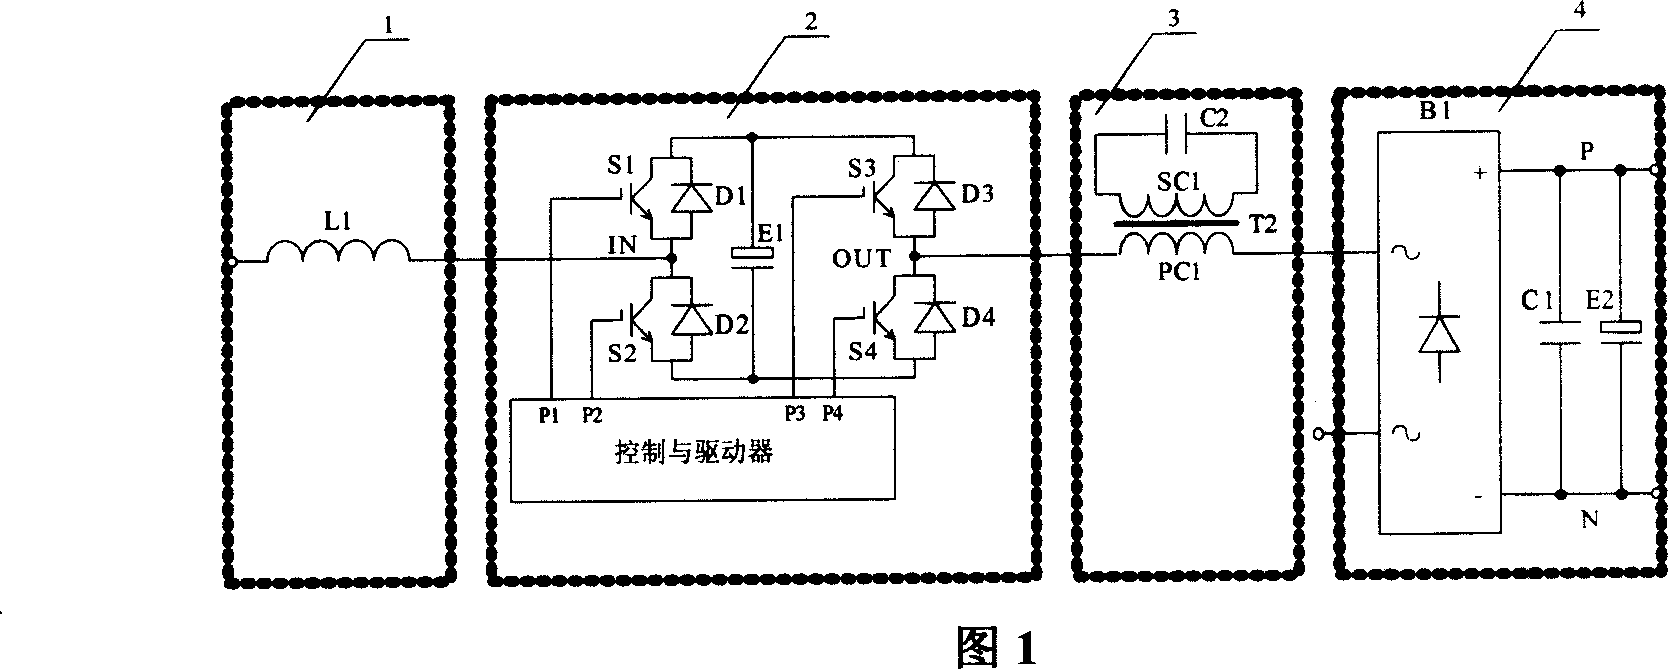 Active passive mixed single phase power factor correcting circuit